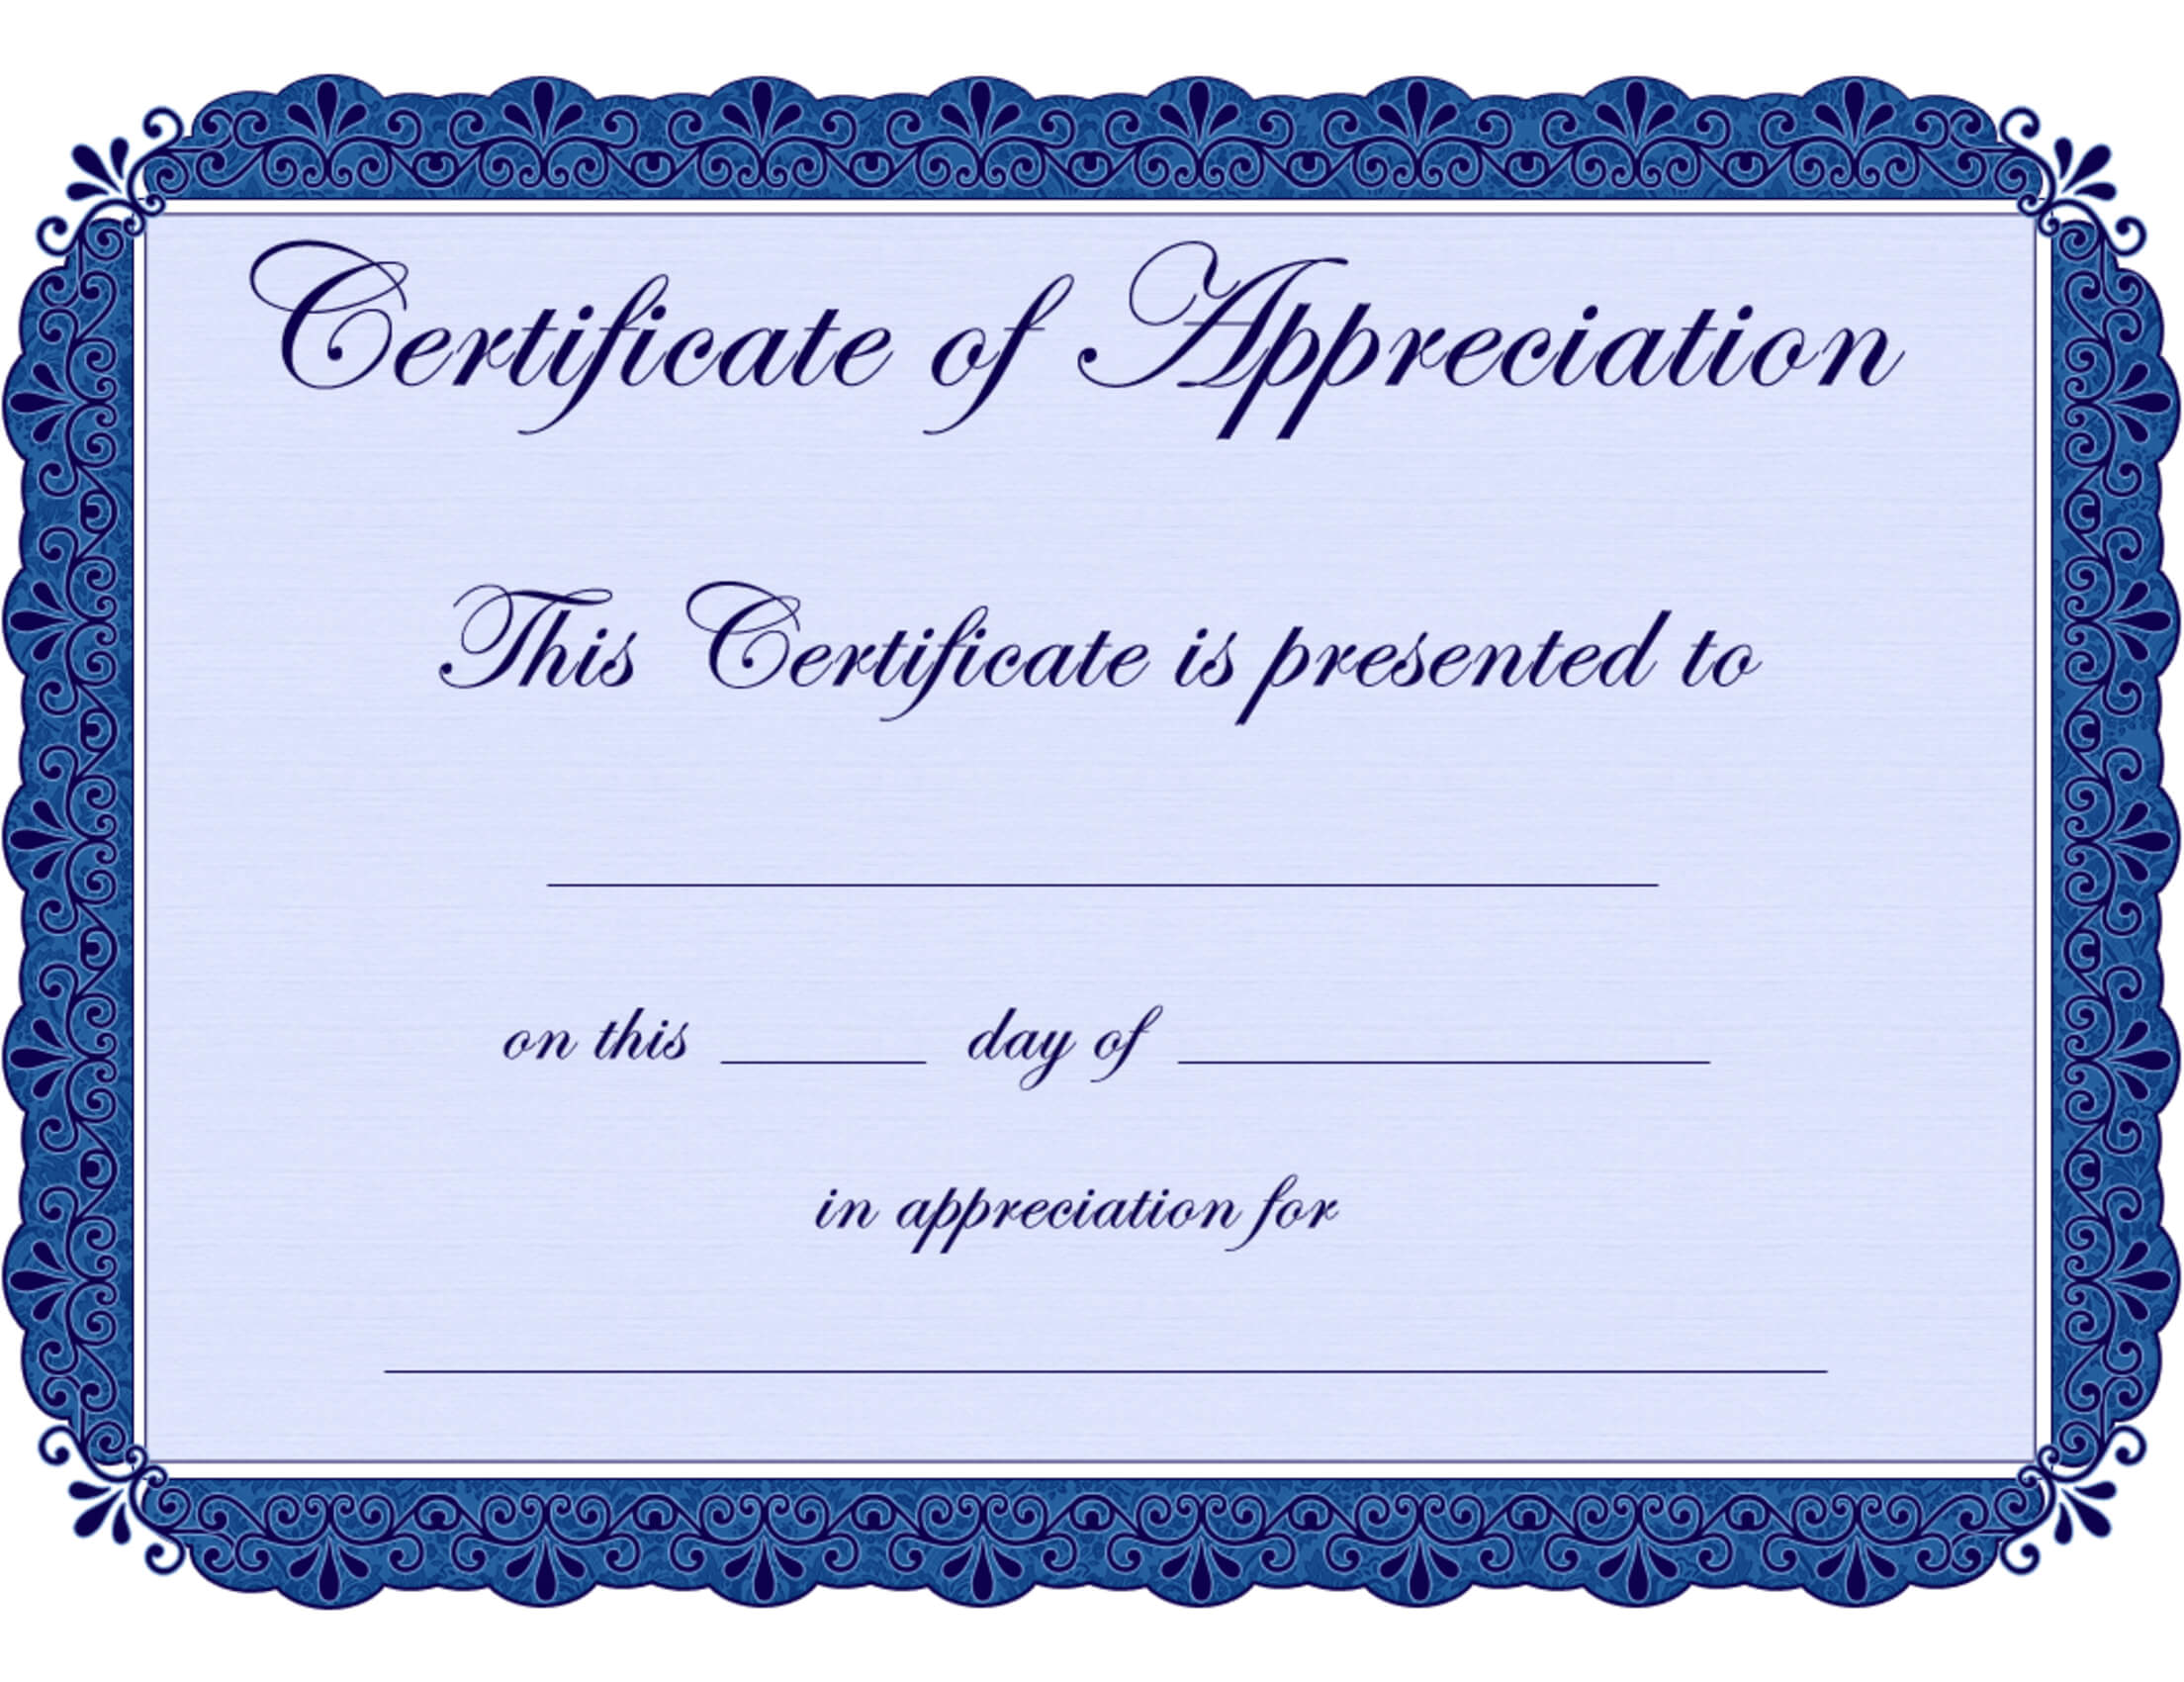 Free Printable Certificates Certificate Of Appreciation With Blank Certificate Of Achievement Template